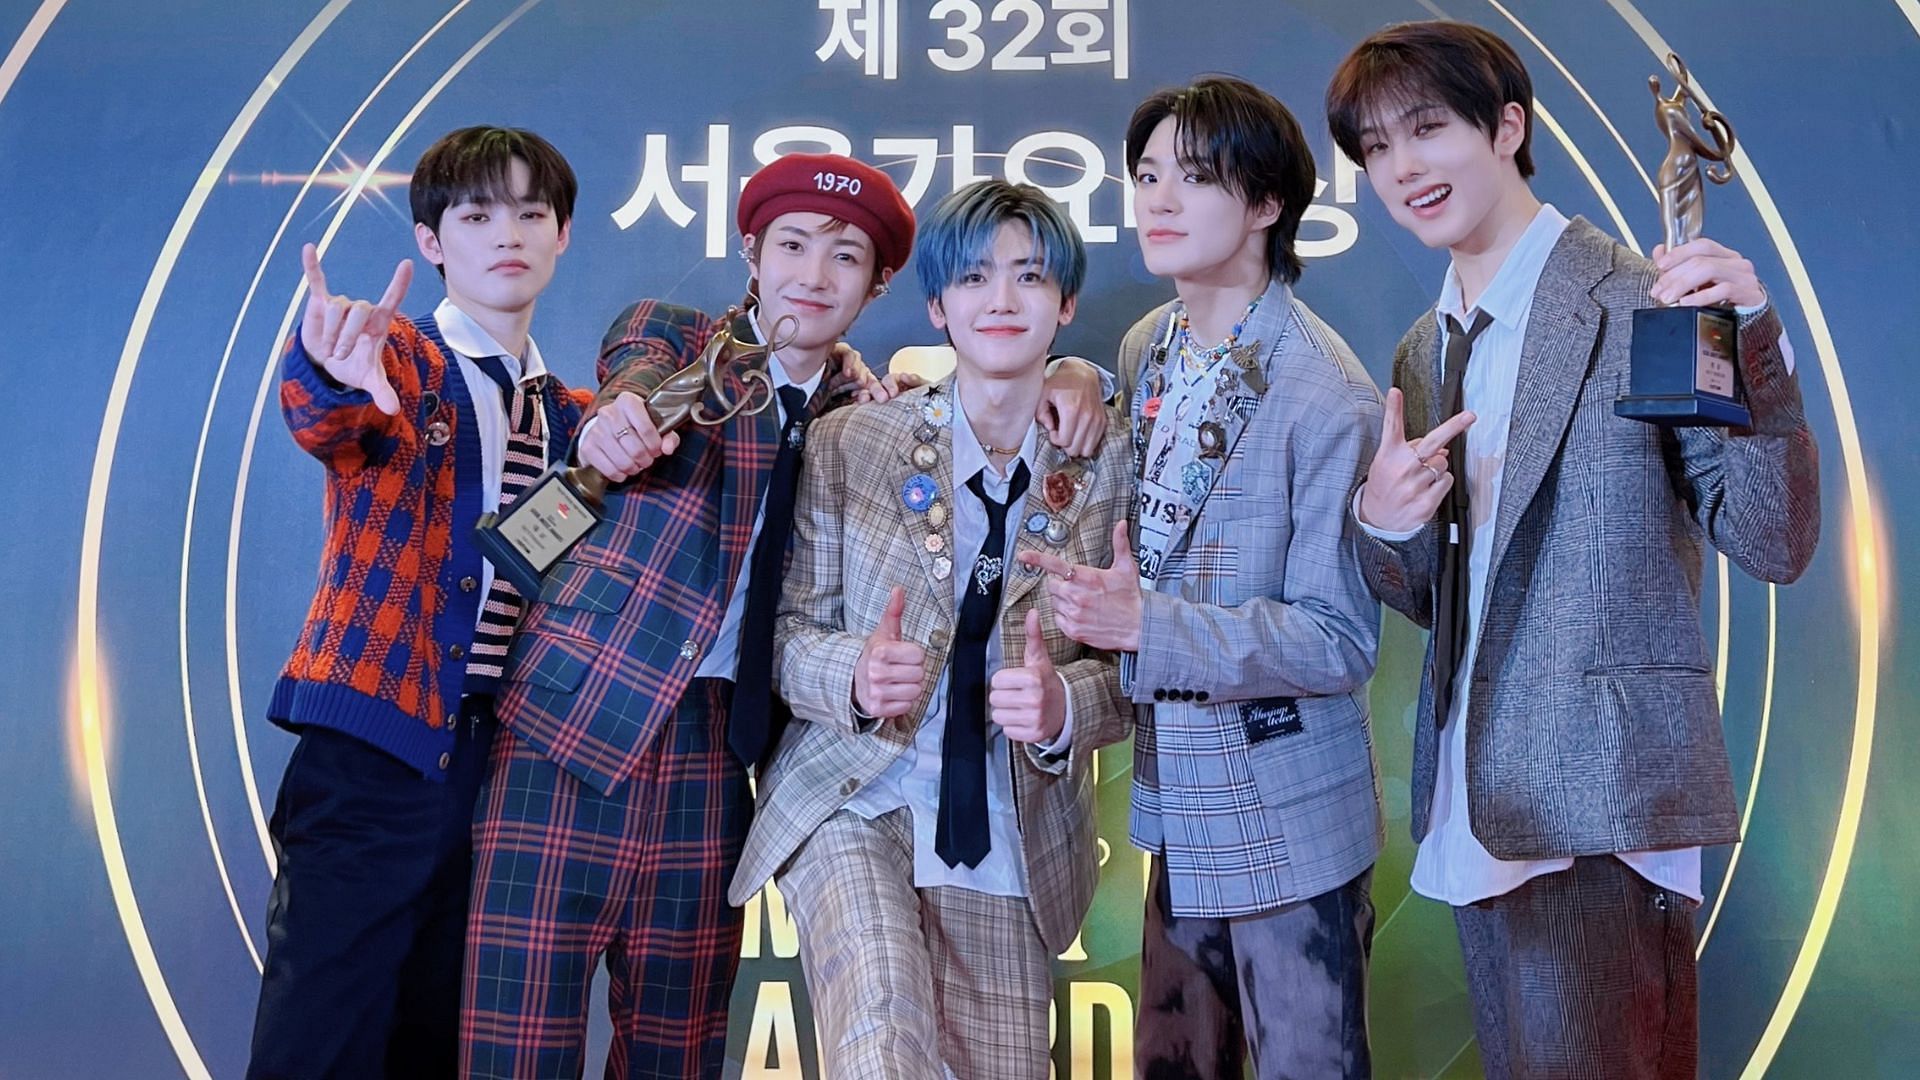 NCT Dream take home the highest award of the night, daesang, at the 32nd SMAs (Image via Twitter/NCTsmtown_DREAM)